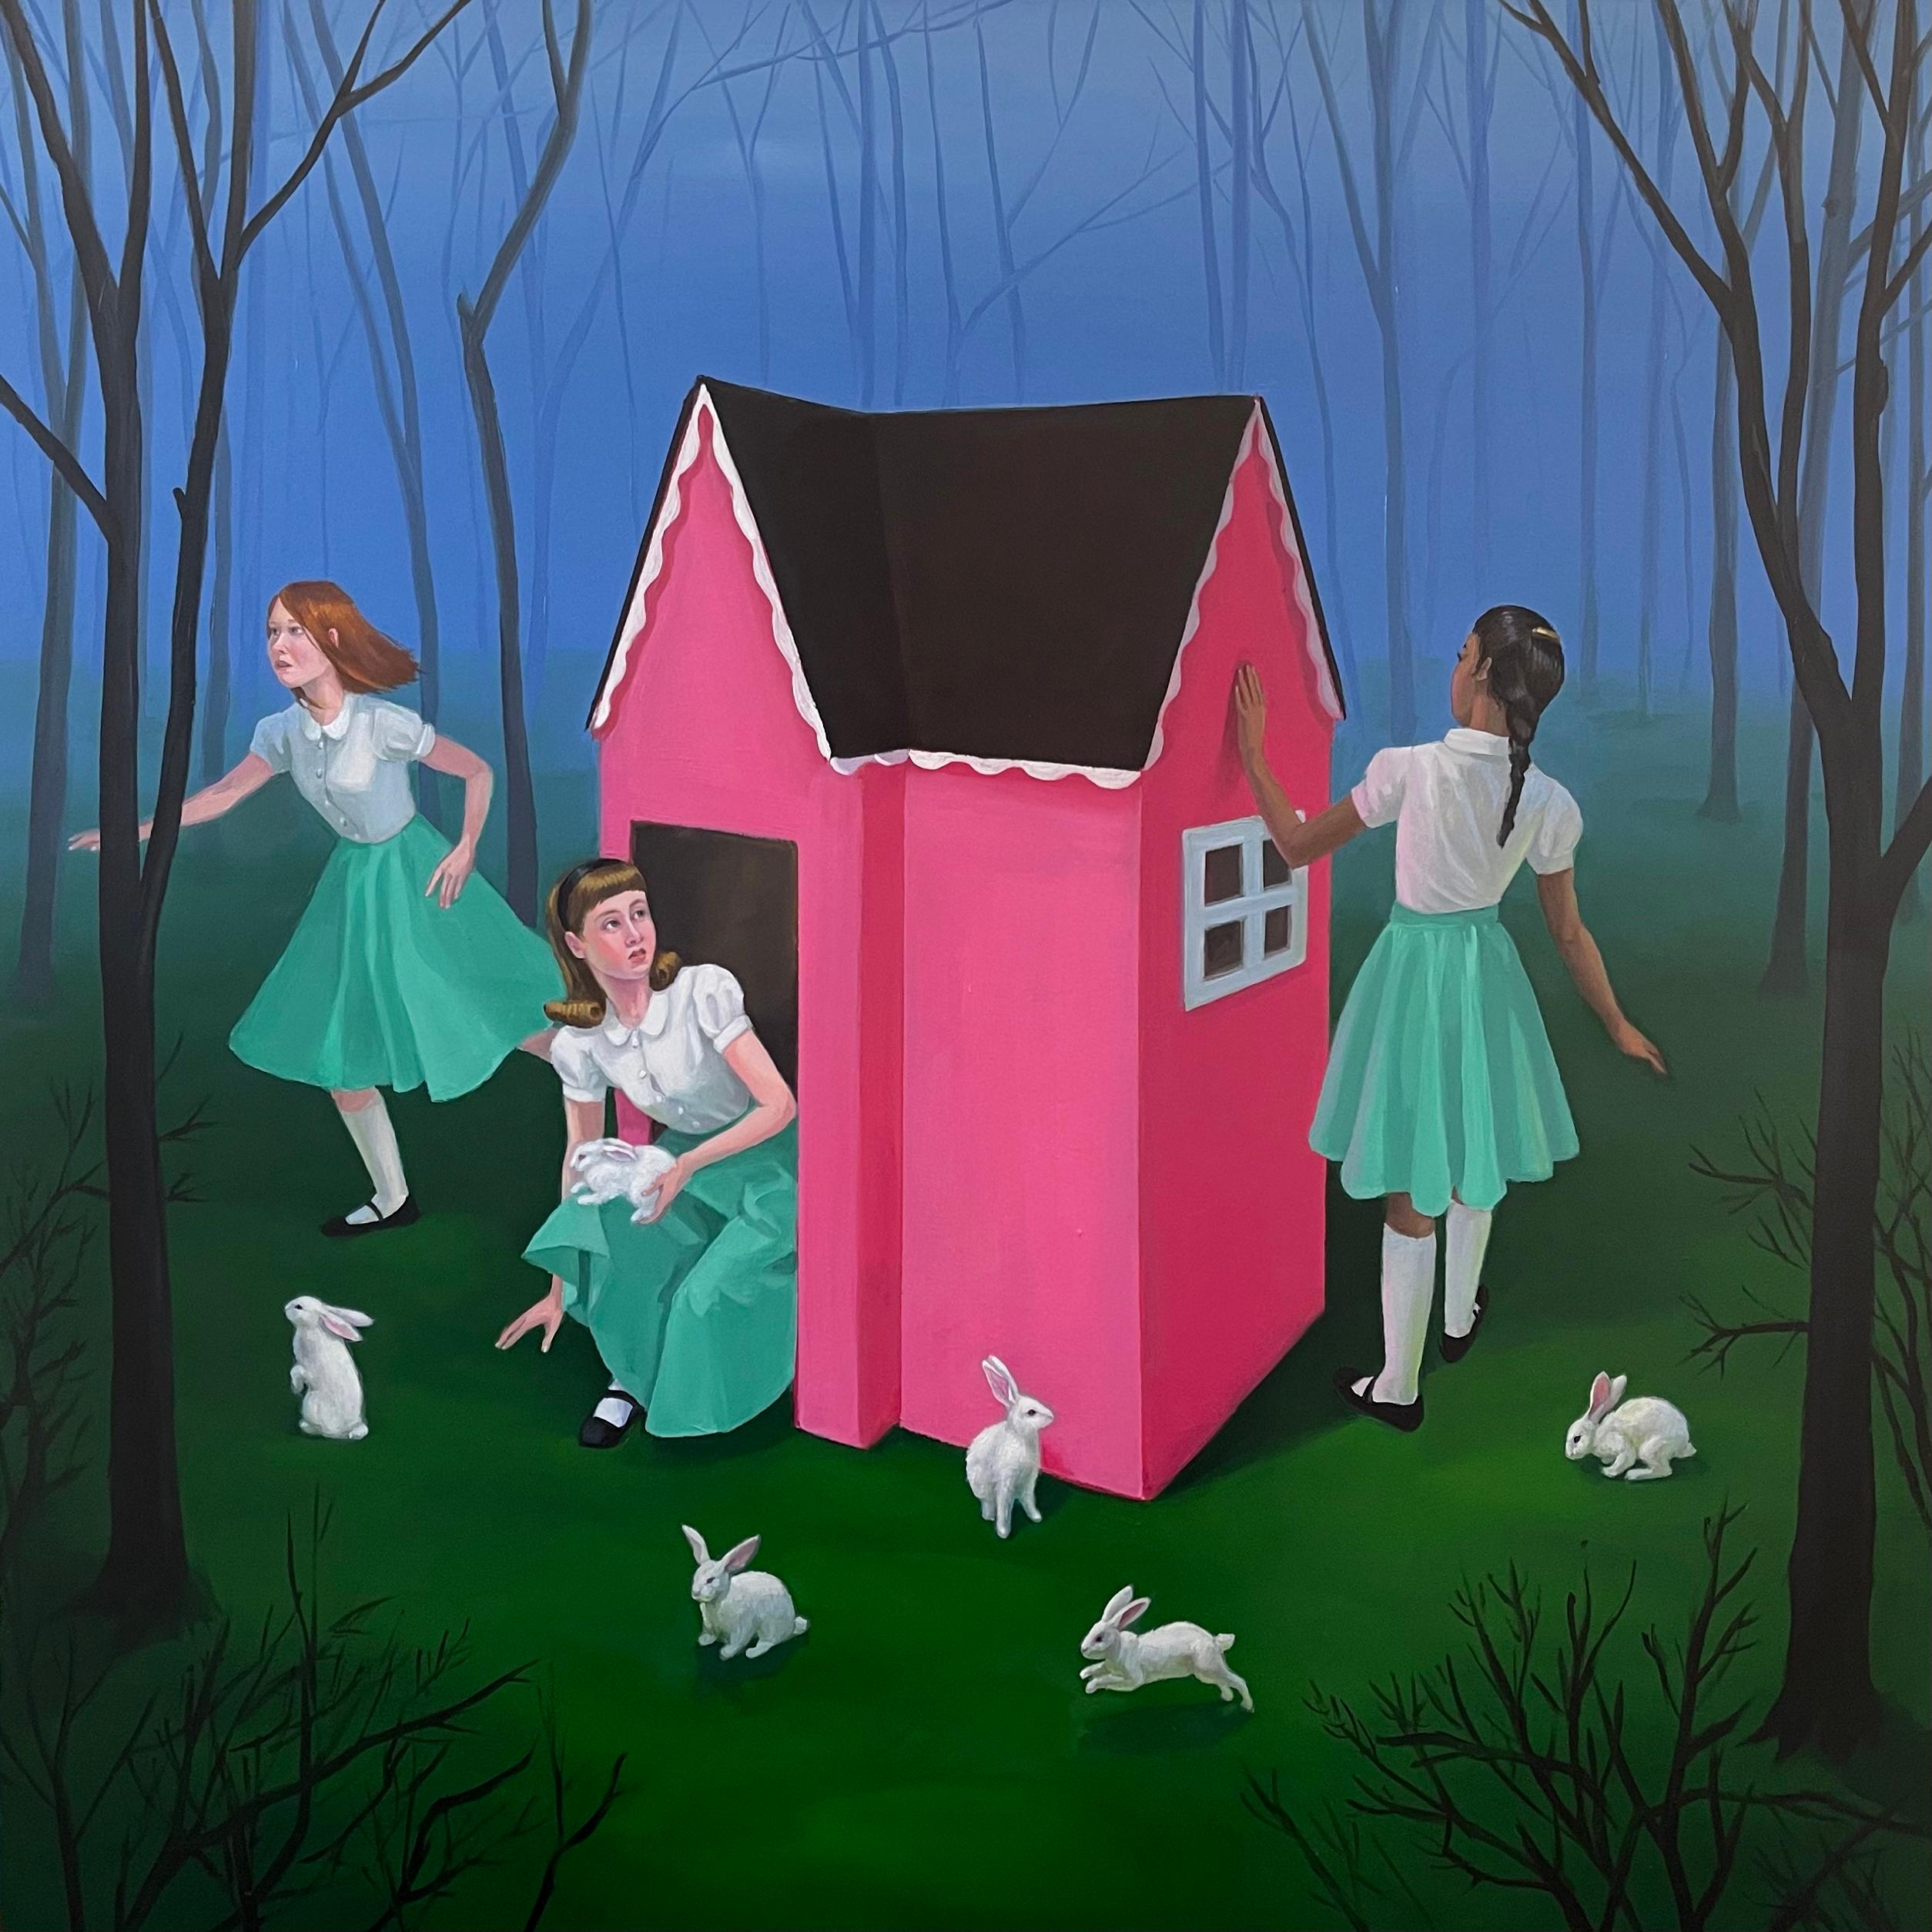 Playhouse - Painting by Zoe Hawk